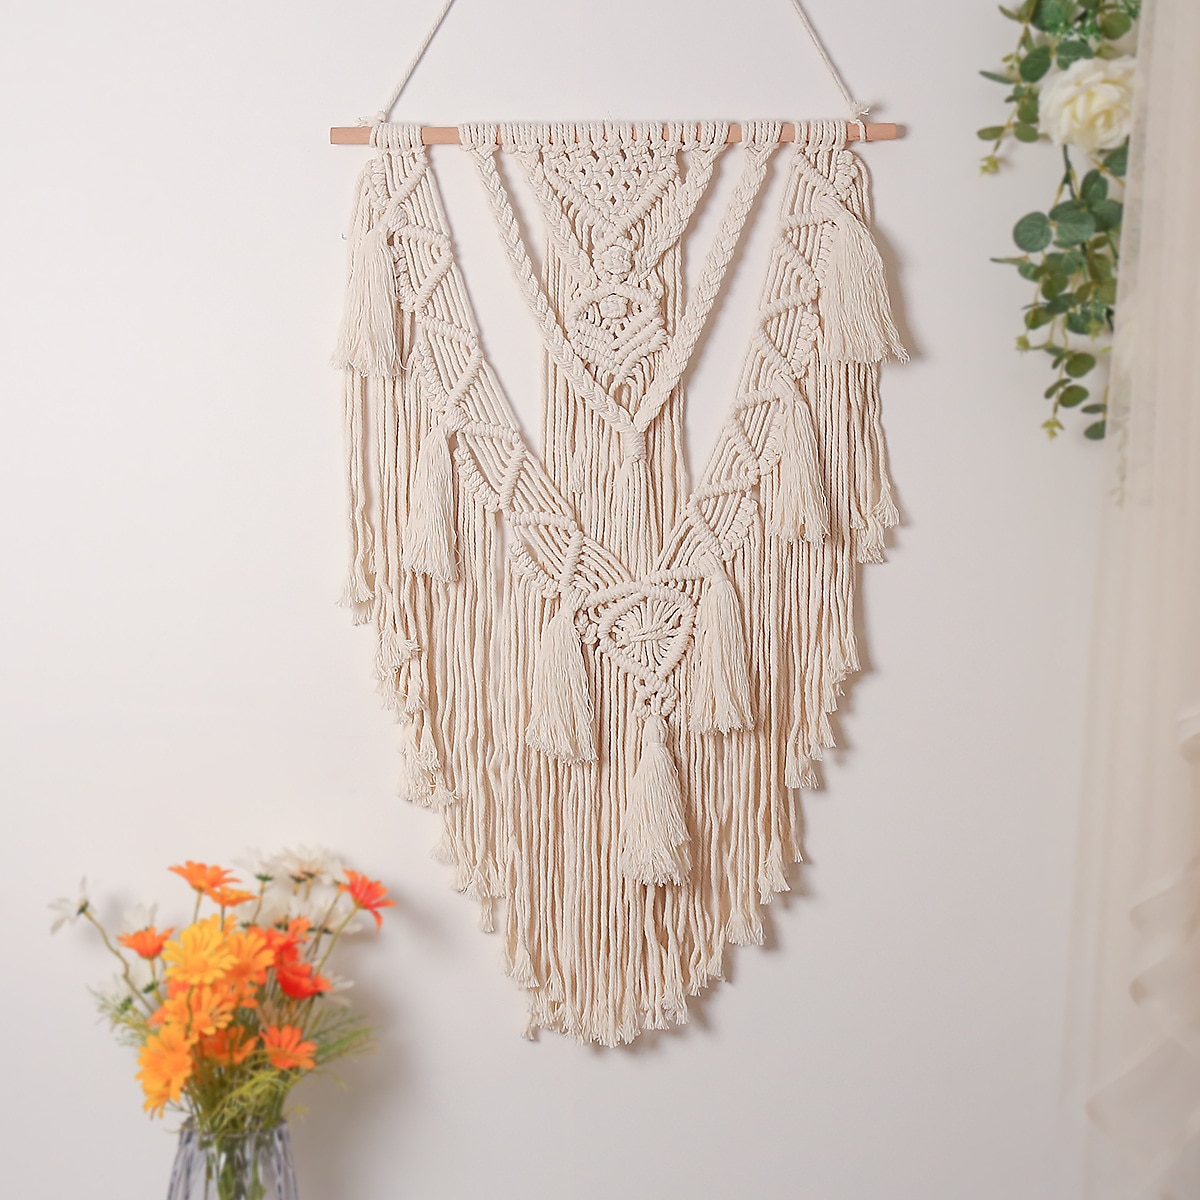 ins homestay Cotton Rope Hand-Woven Wall hangings Guest Bedroom Wall hangings Flower Racks Dried Flower Decoration